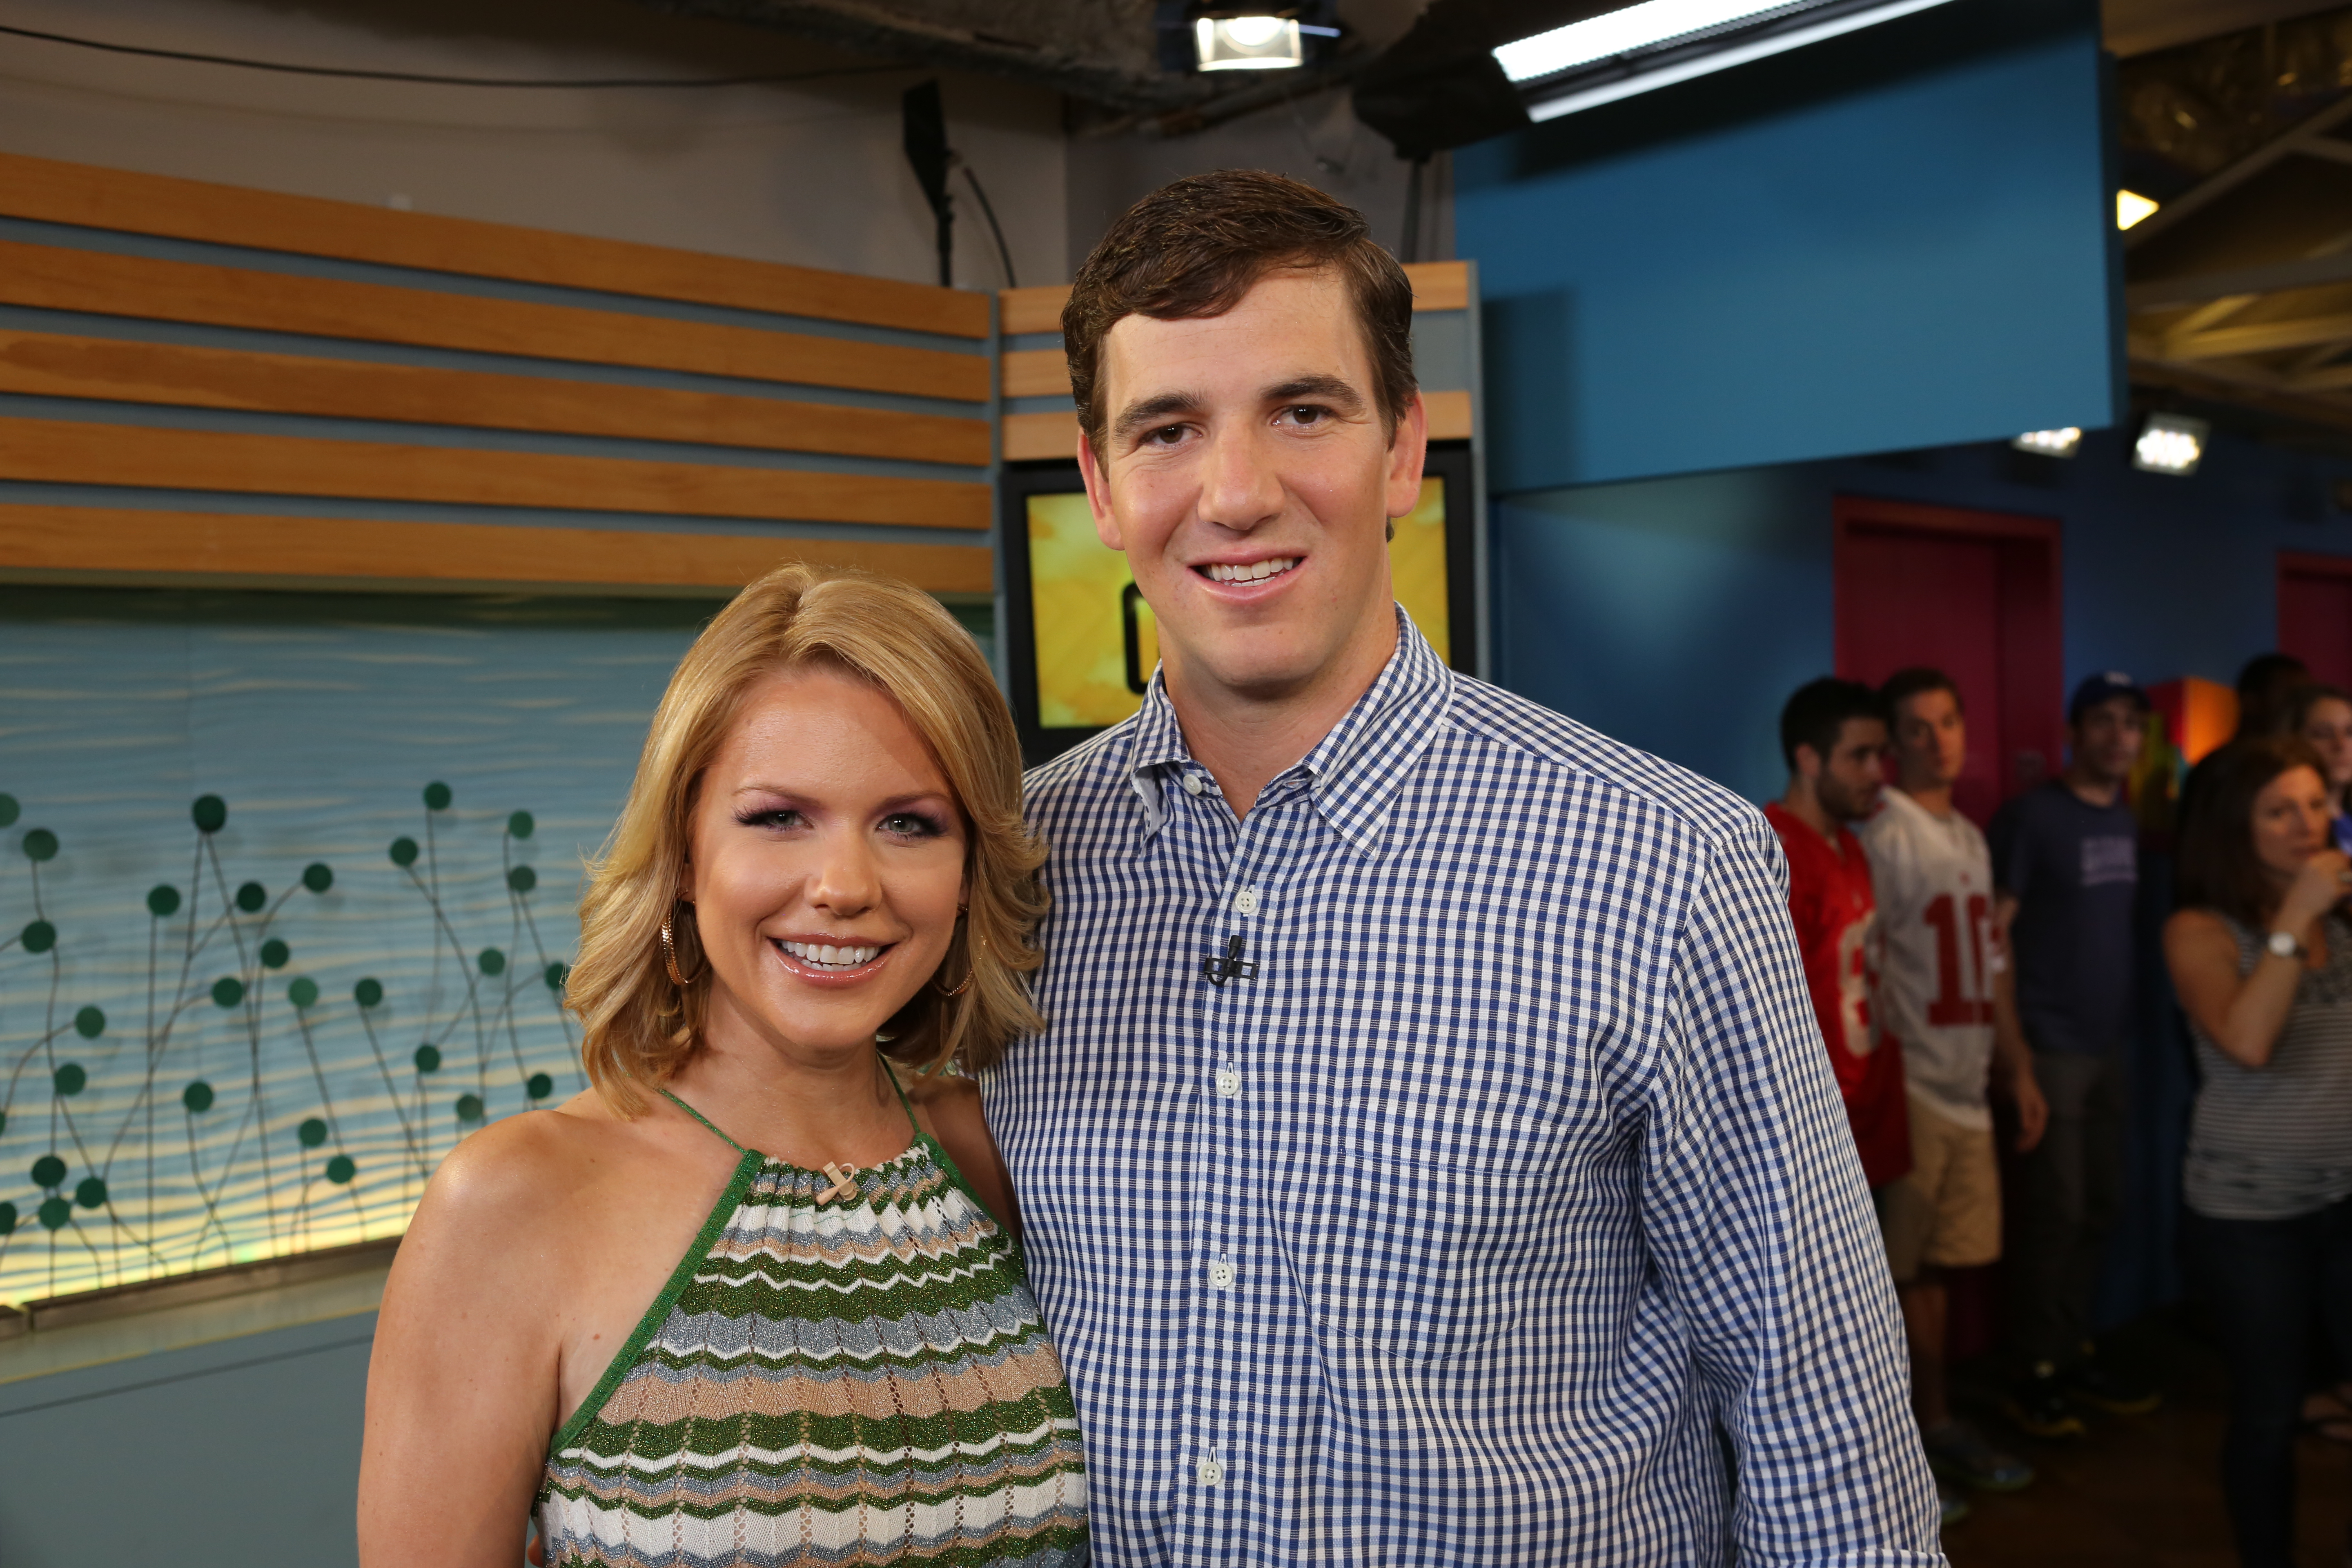 Carrie Keagan with Eli Manning on the set of Vh1 Big Morning Buzz Live with Carrie Keagan